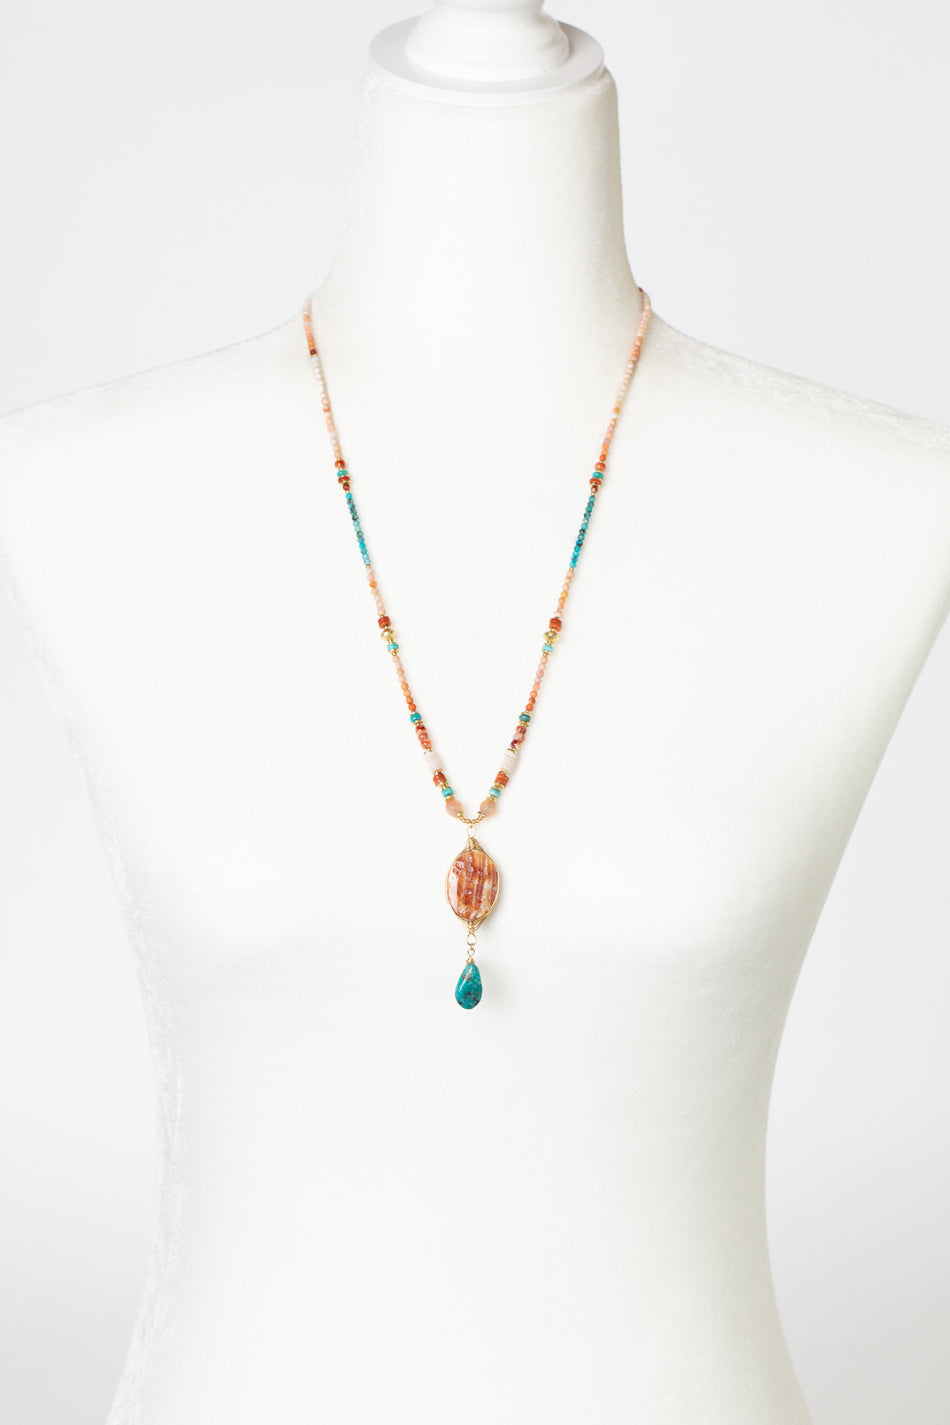 One Of A Kind 23.5-25.5" Turquoise, Fire Opal, Shell with Spiny Oyster Statement Necklace